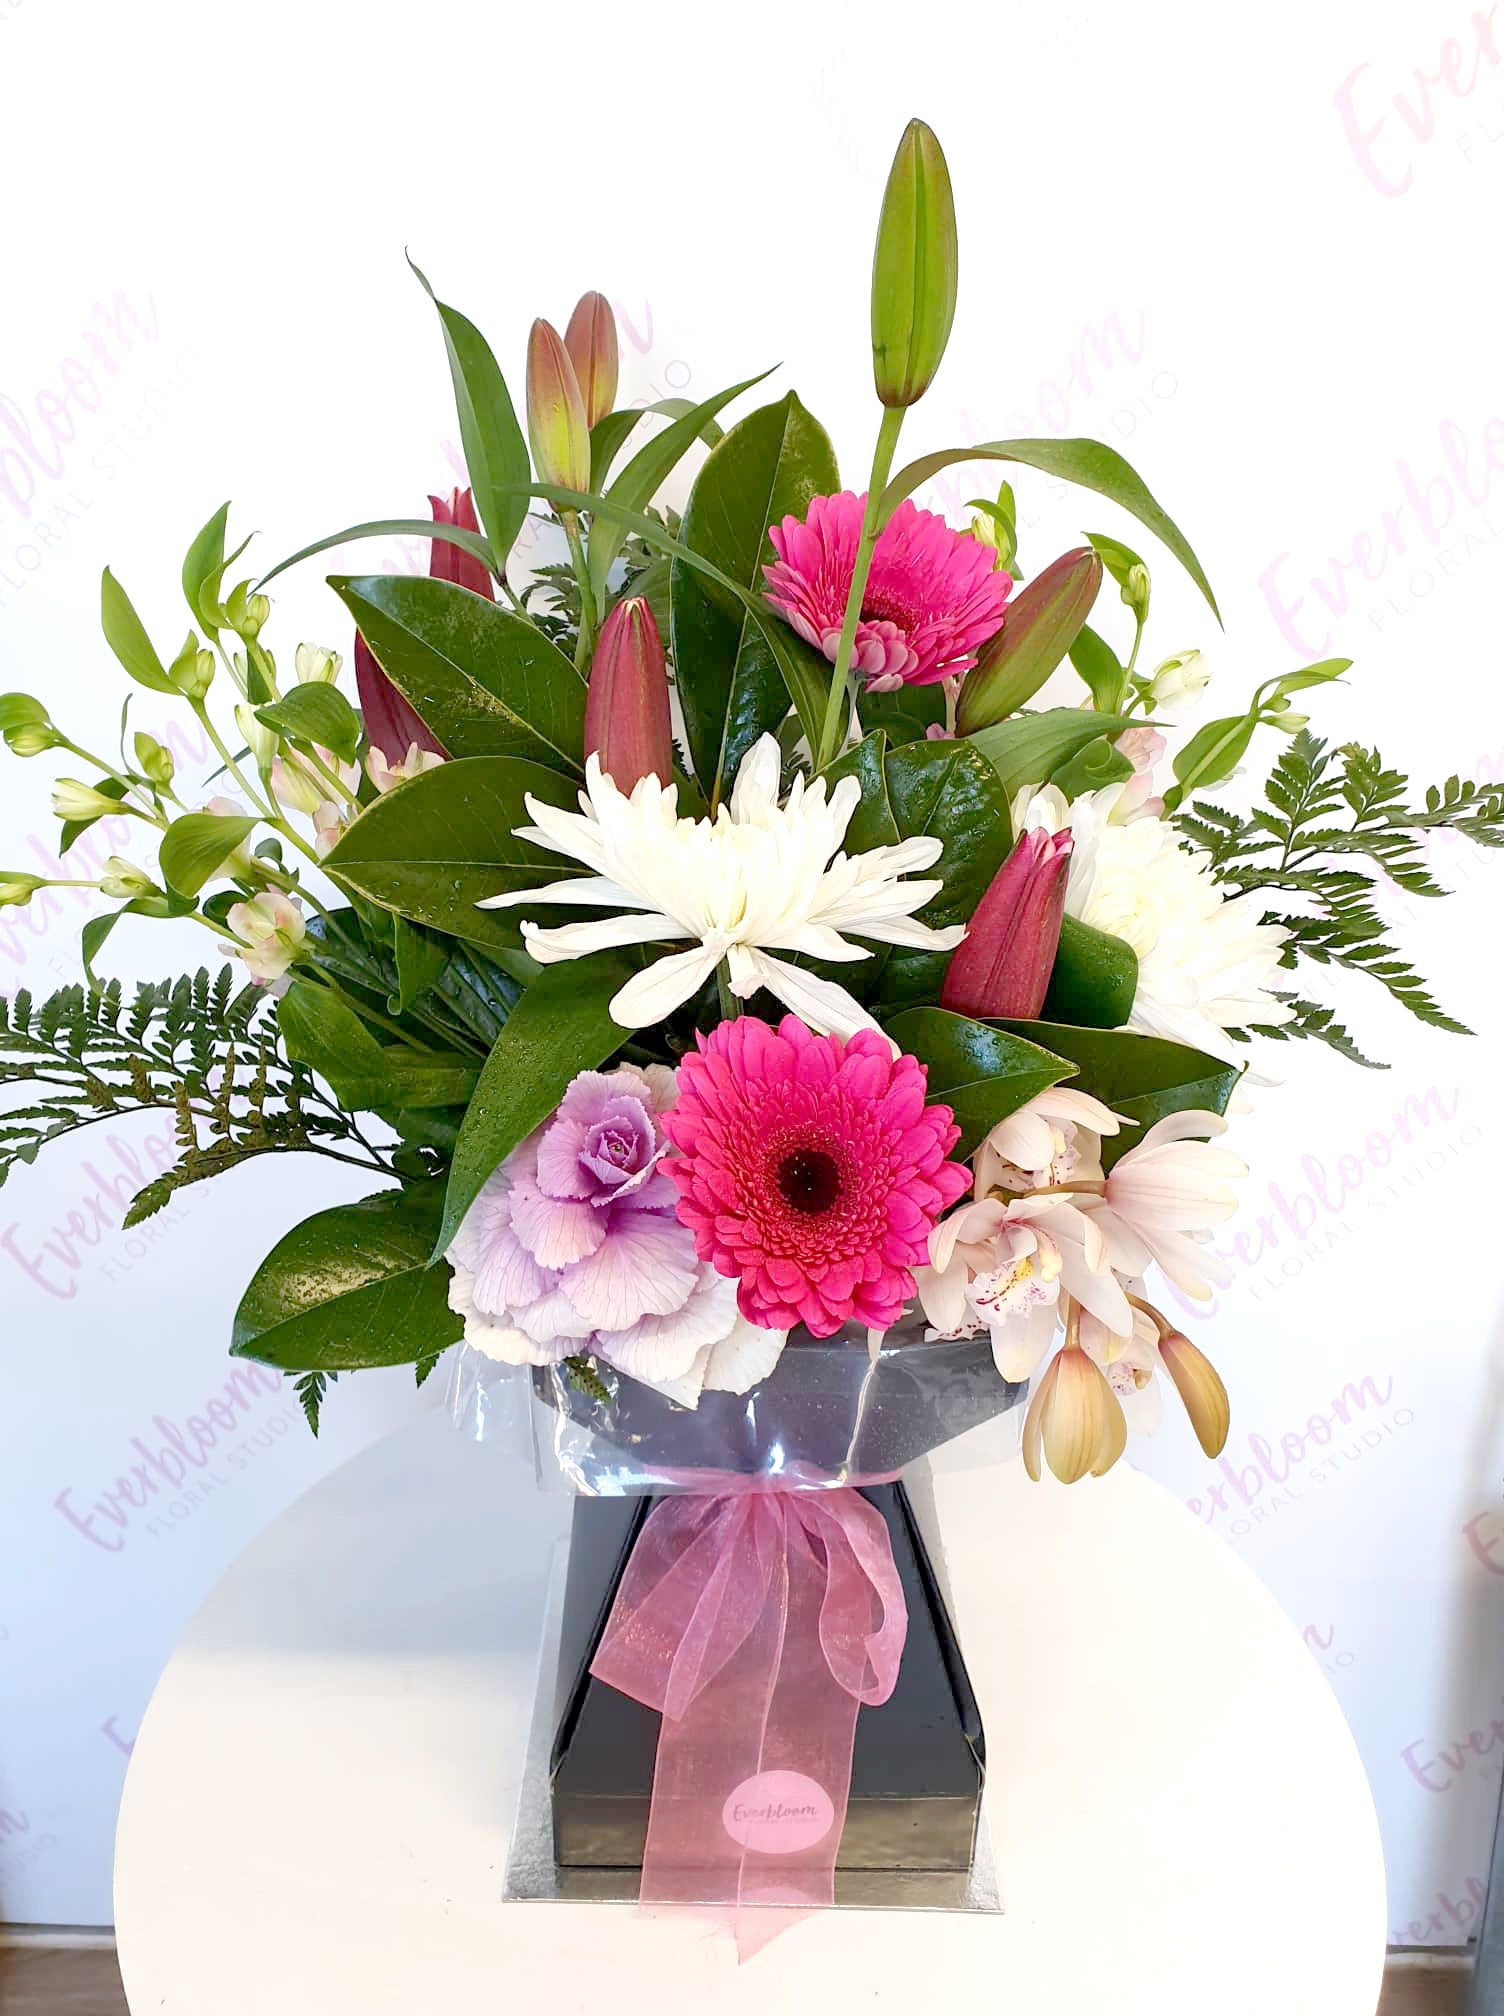 Our Vox box is a fresh flower arrangement in a re-usable cardboard vase with liner. Vox boxes are a popular choice for sympathy flowers, offices, hospitals and apartments where no vase is needed. Simply display and enjoy with no fuss. Everbloom floral studio is your local friendly Mount Maunganui and Papamoa florist offering a same day delivery service.